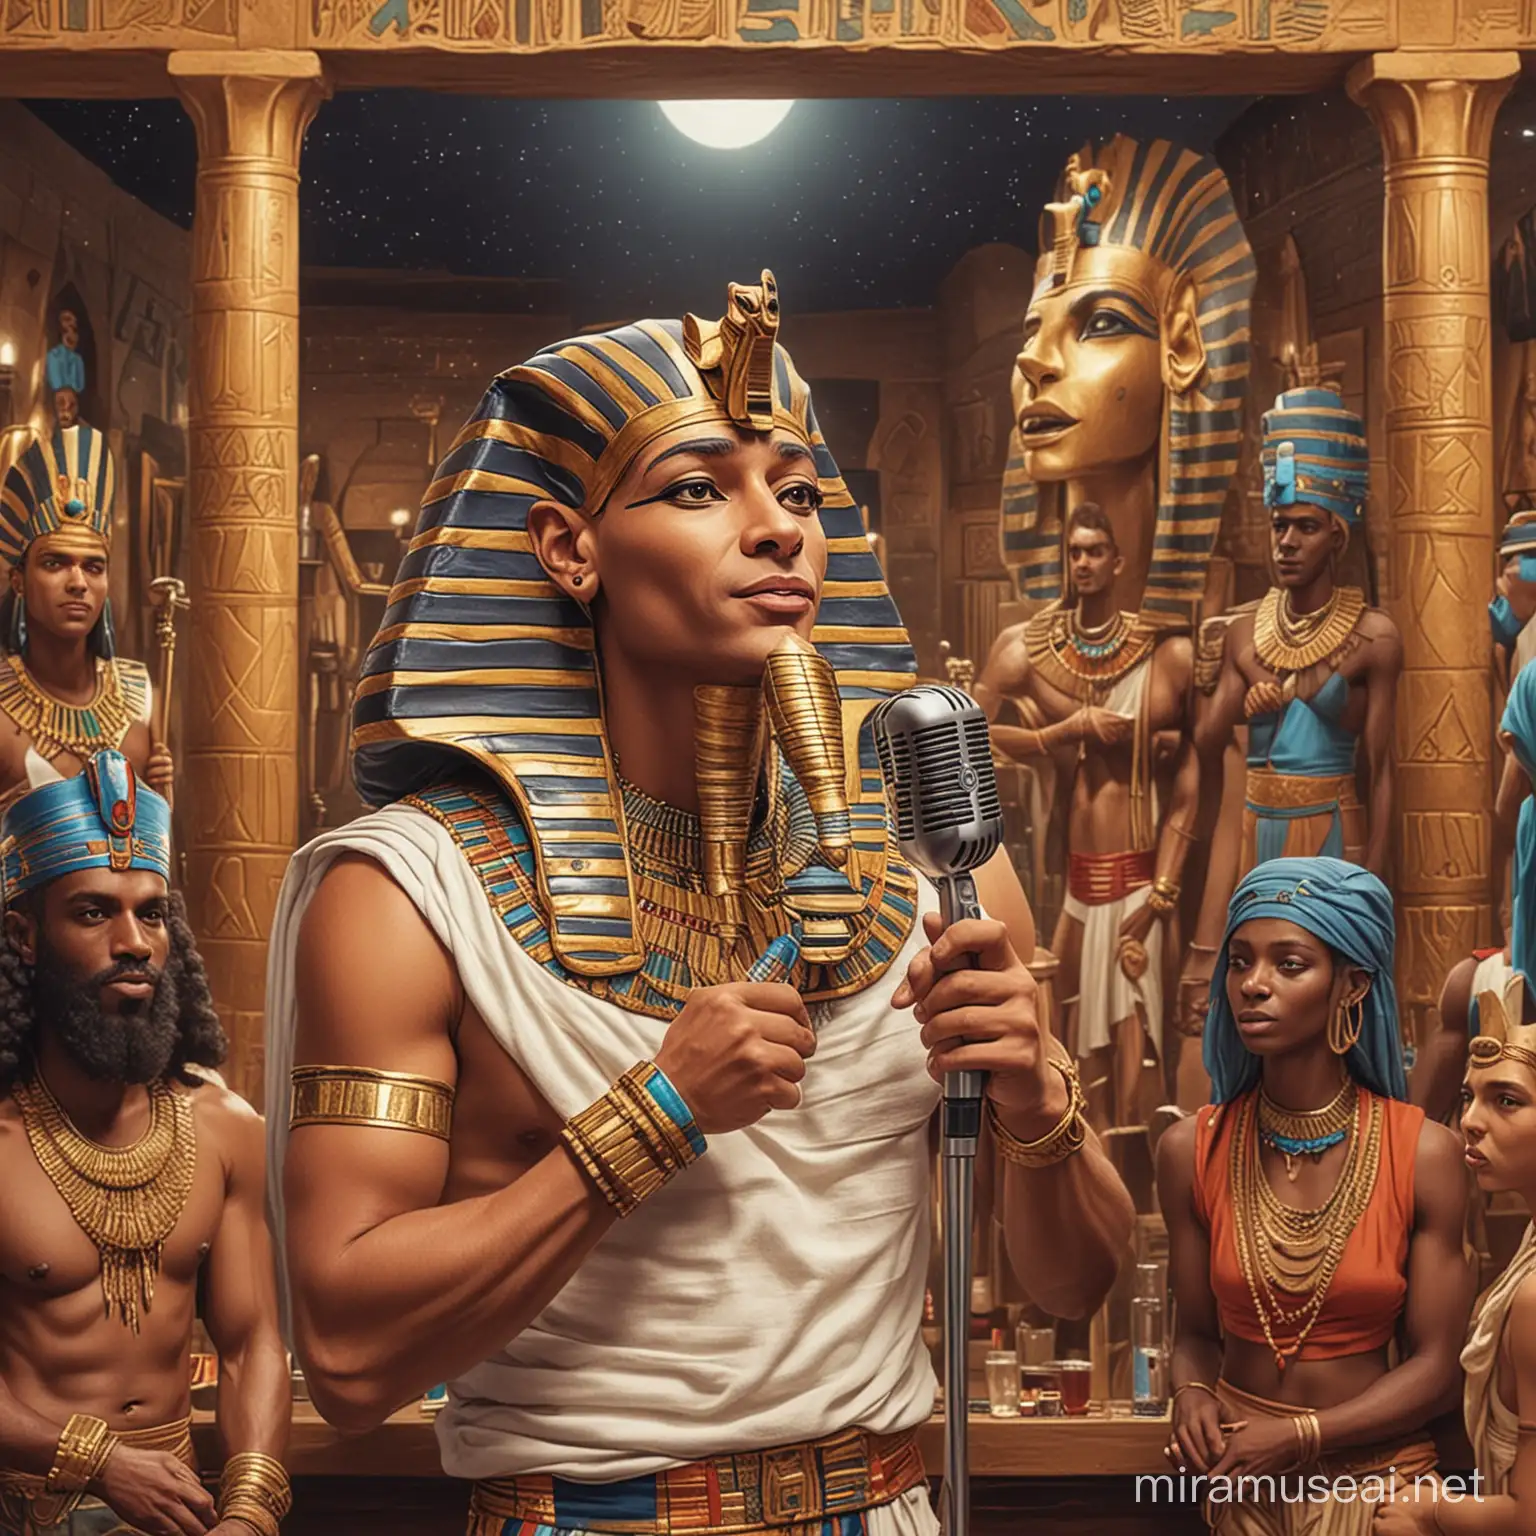 Neighborhood bar background. Pharaoh holds a microphone and sings karaoke together with Moses
